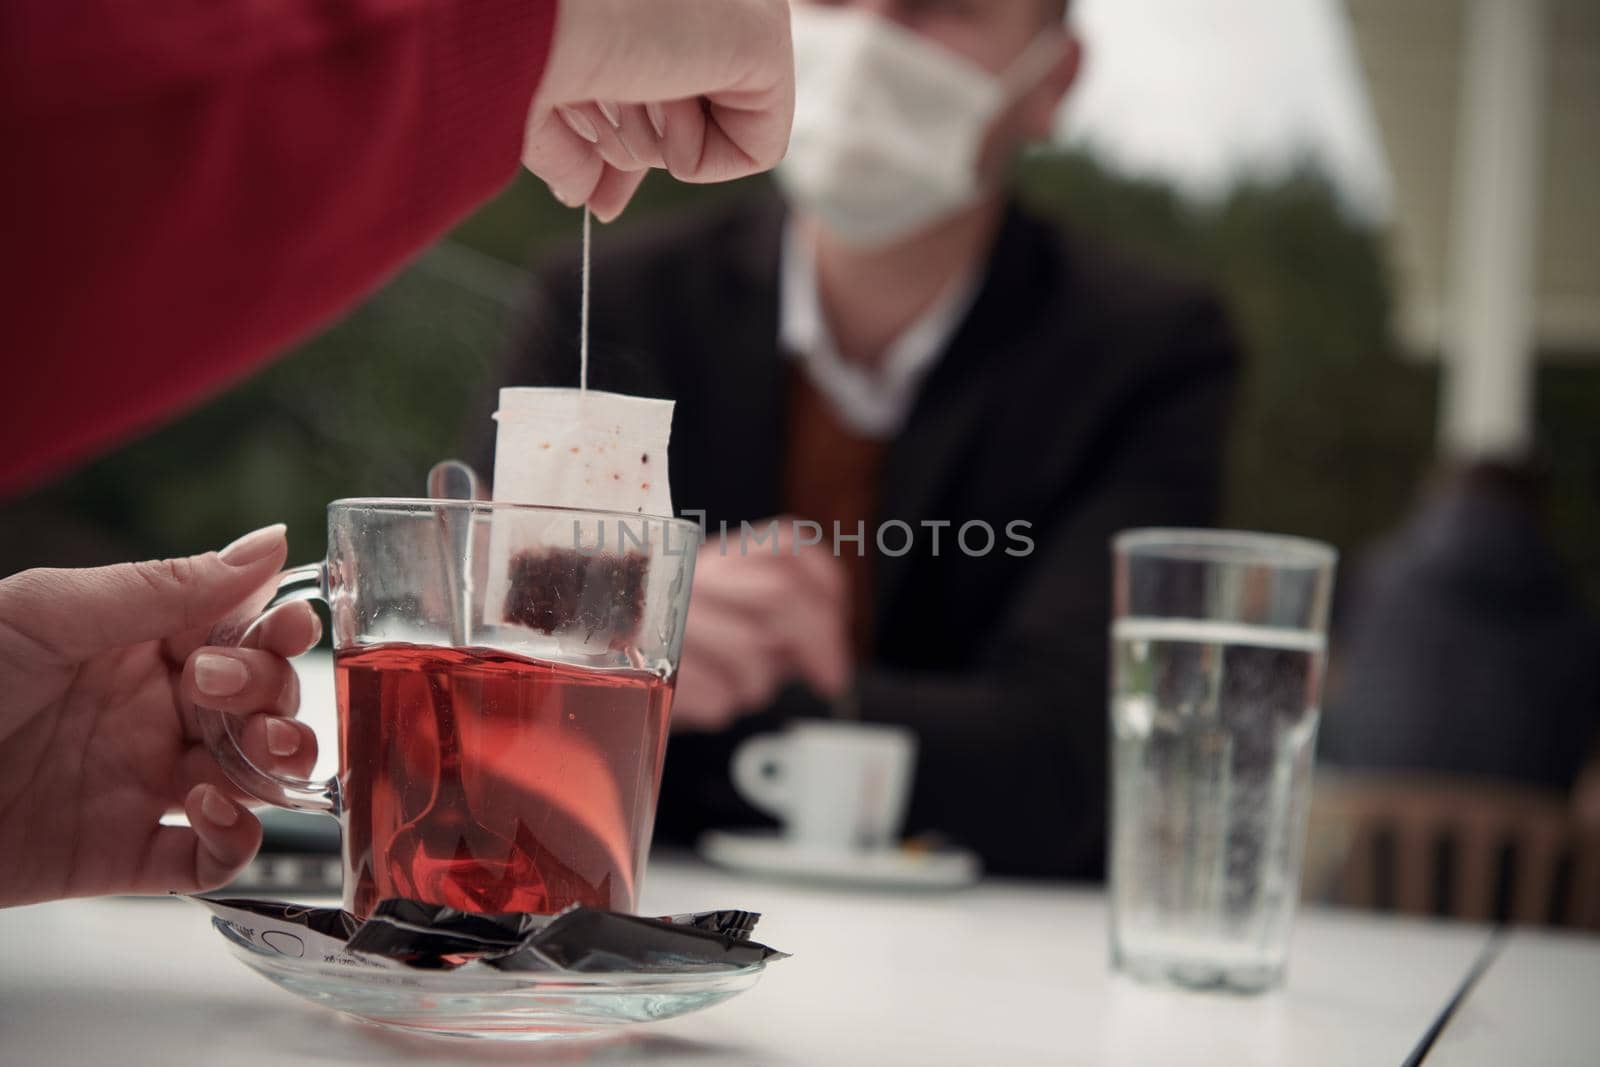 couple with protective medical mask  having coffee break in a restaurant, new normal coronavirus concept